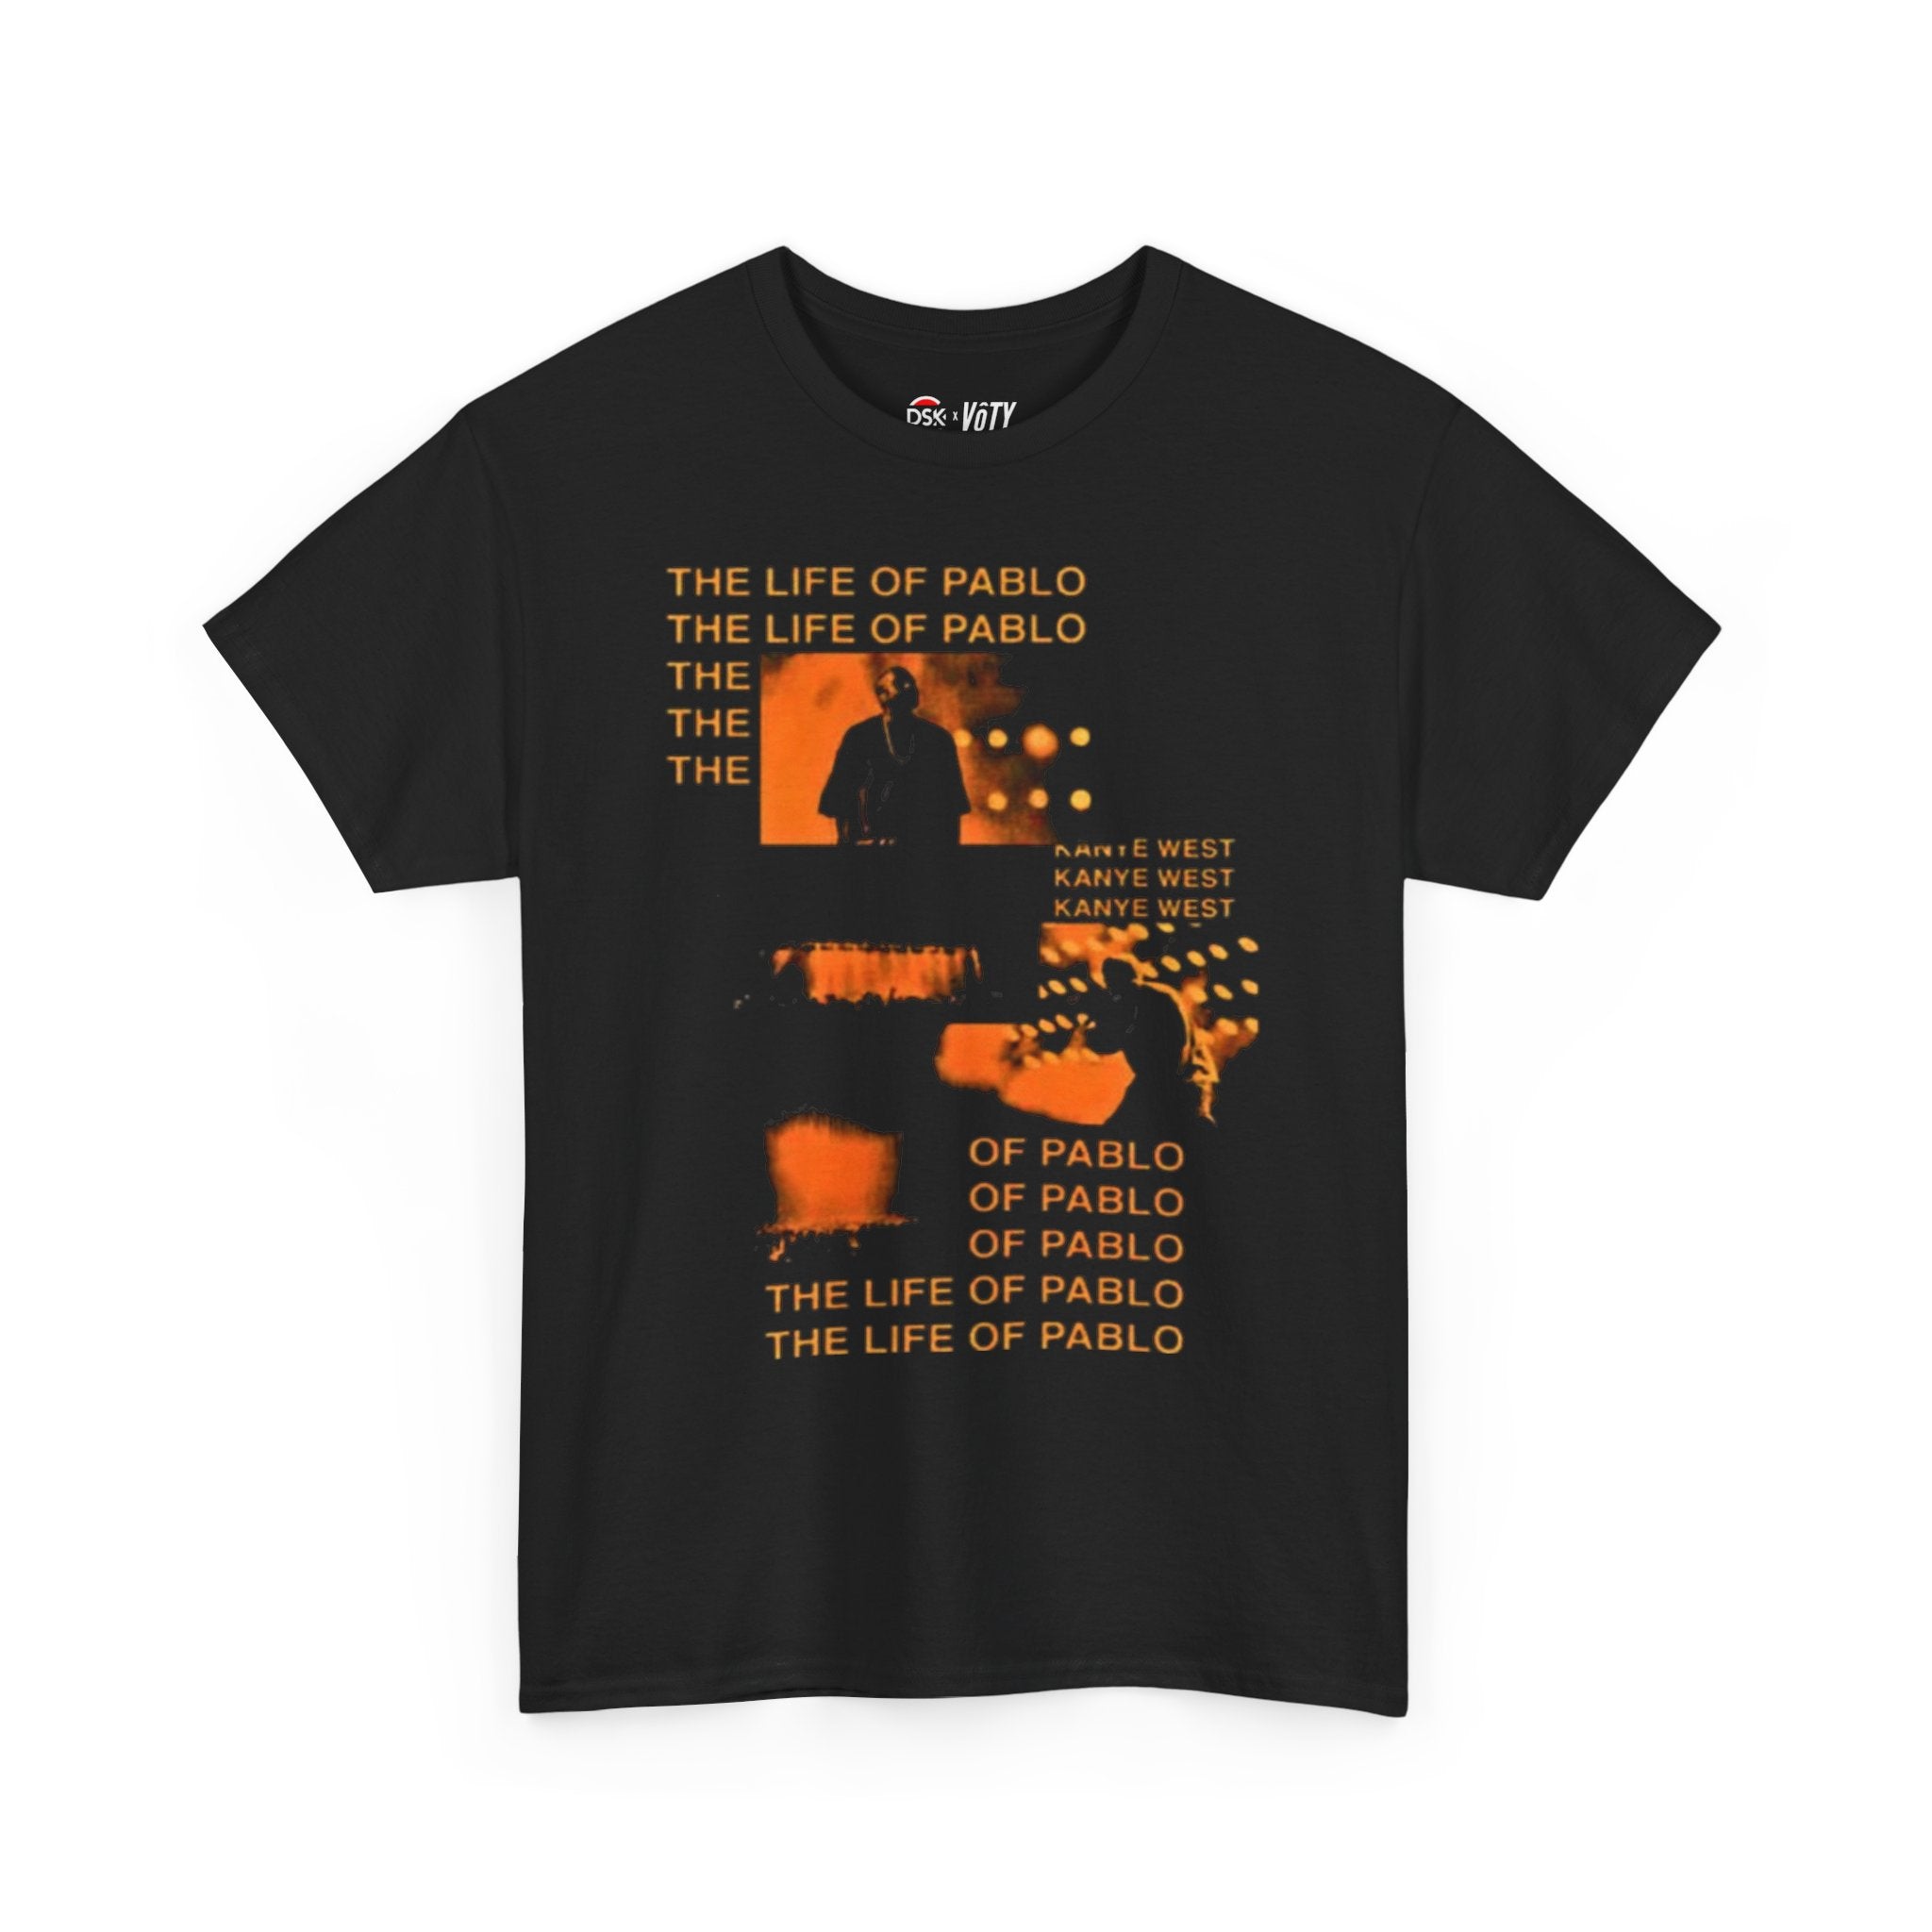 The Life of Pablo T-Shirt